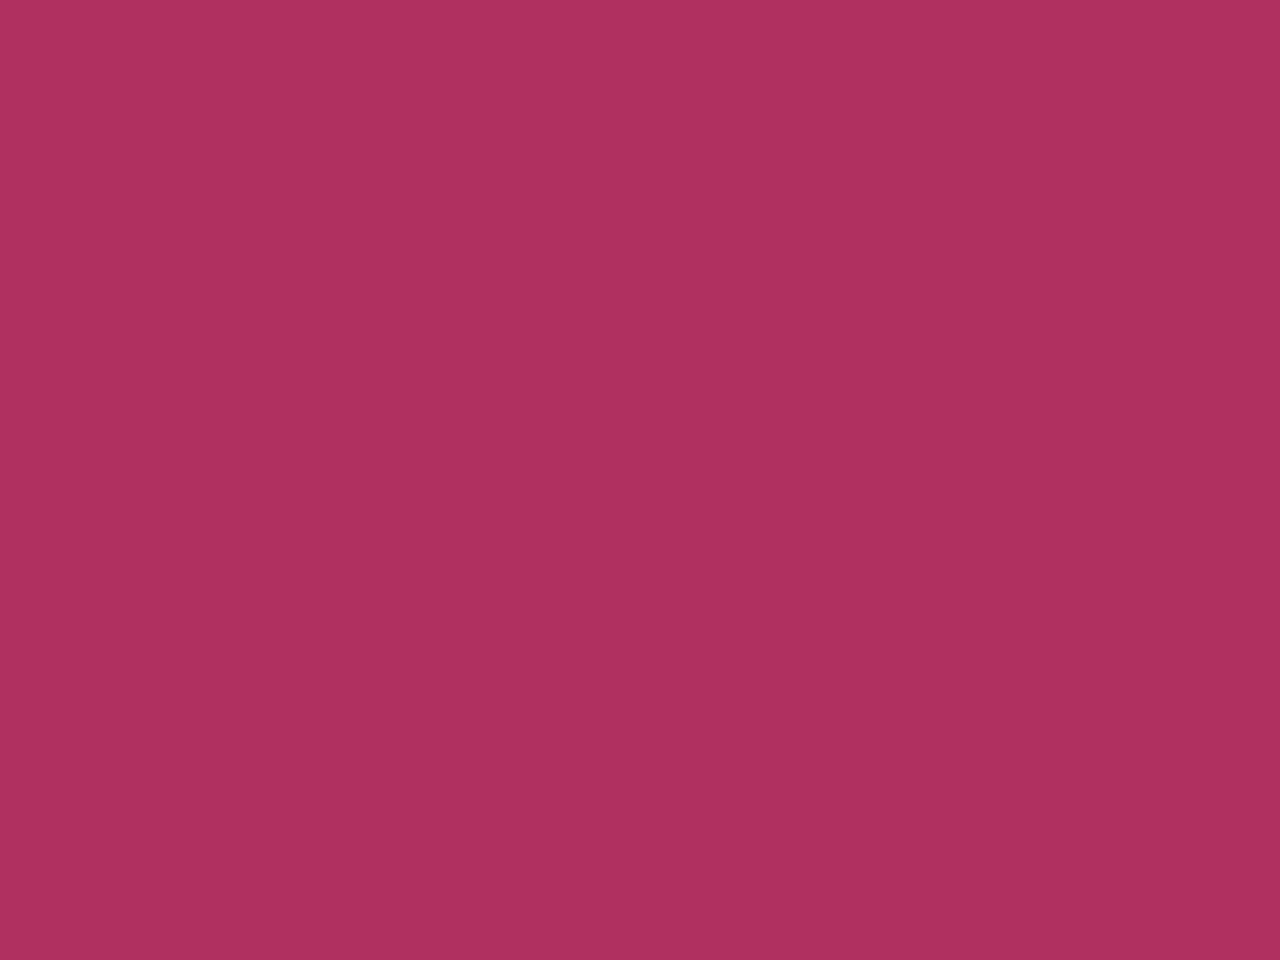 1280x960 Rich Maroon Solid Color Background